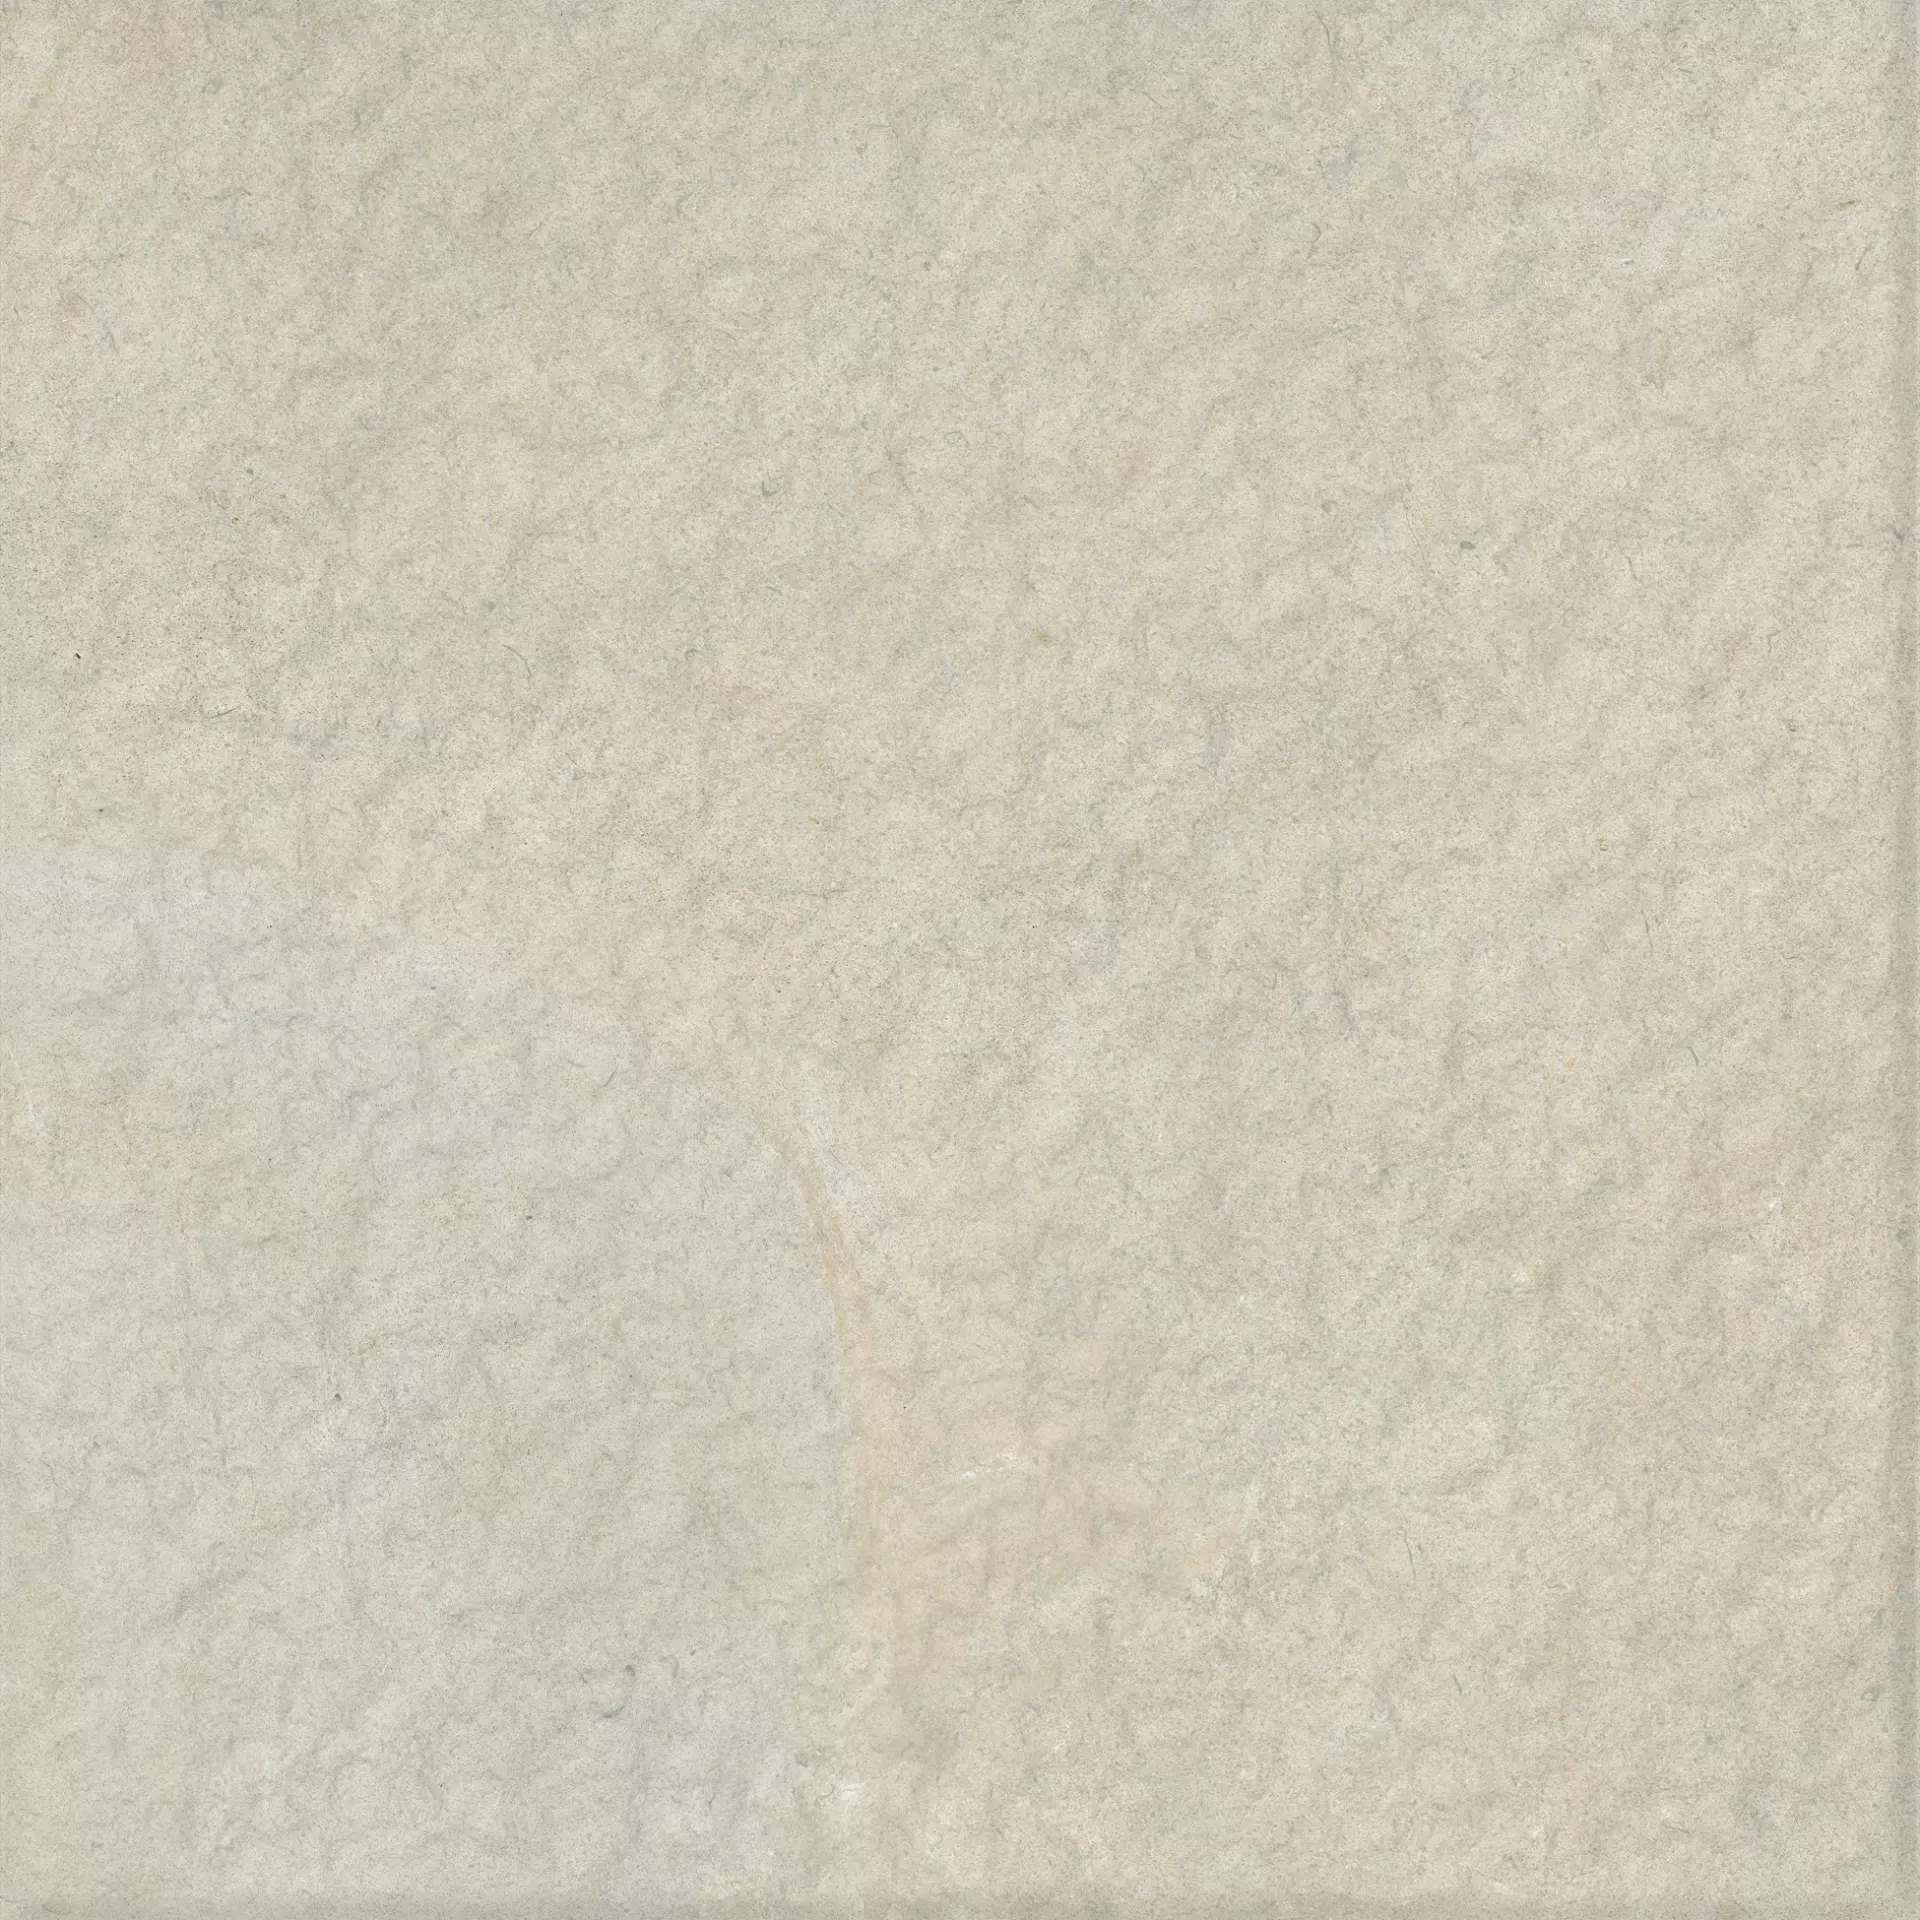 Refin Sublime Beige Out 2.0 OT54 60x60cm rectified 20mm